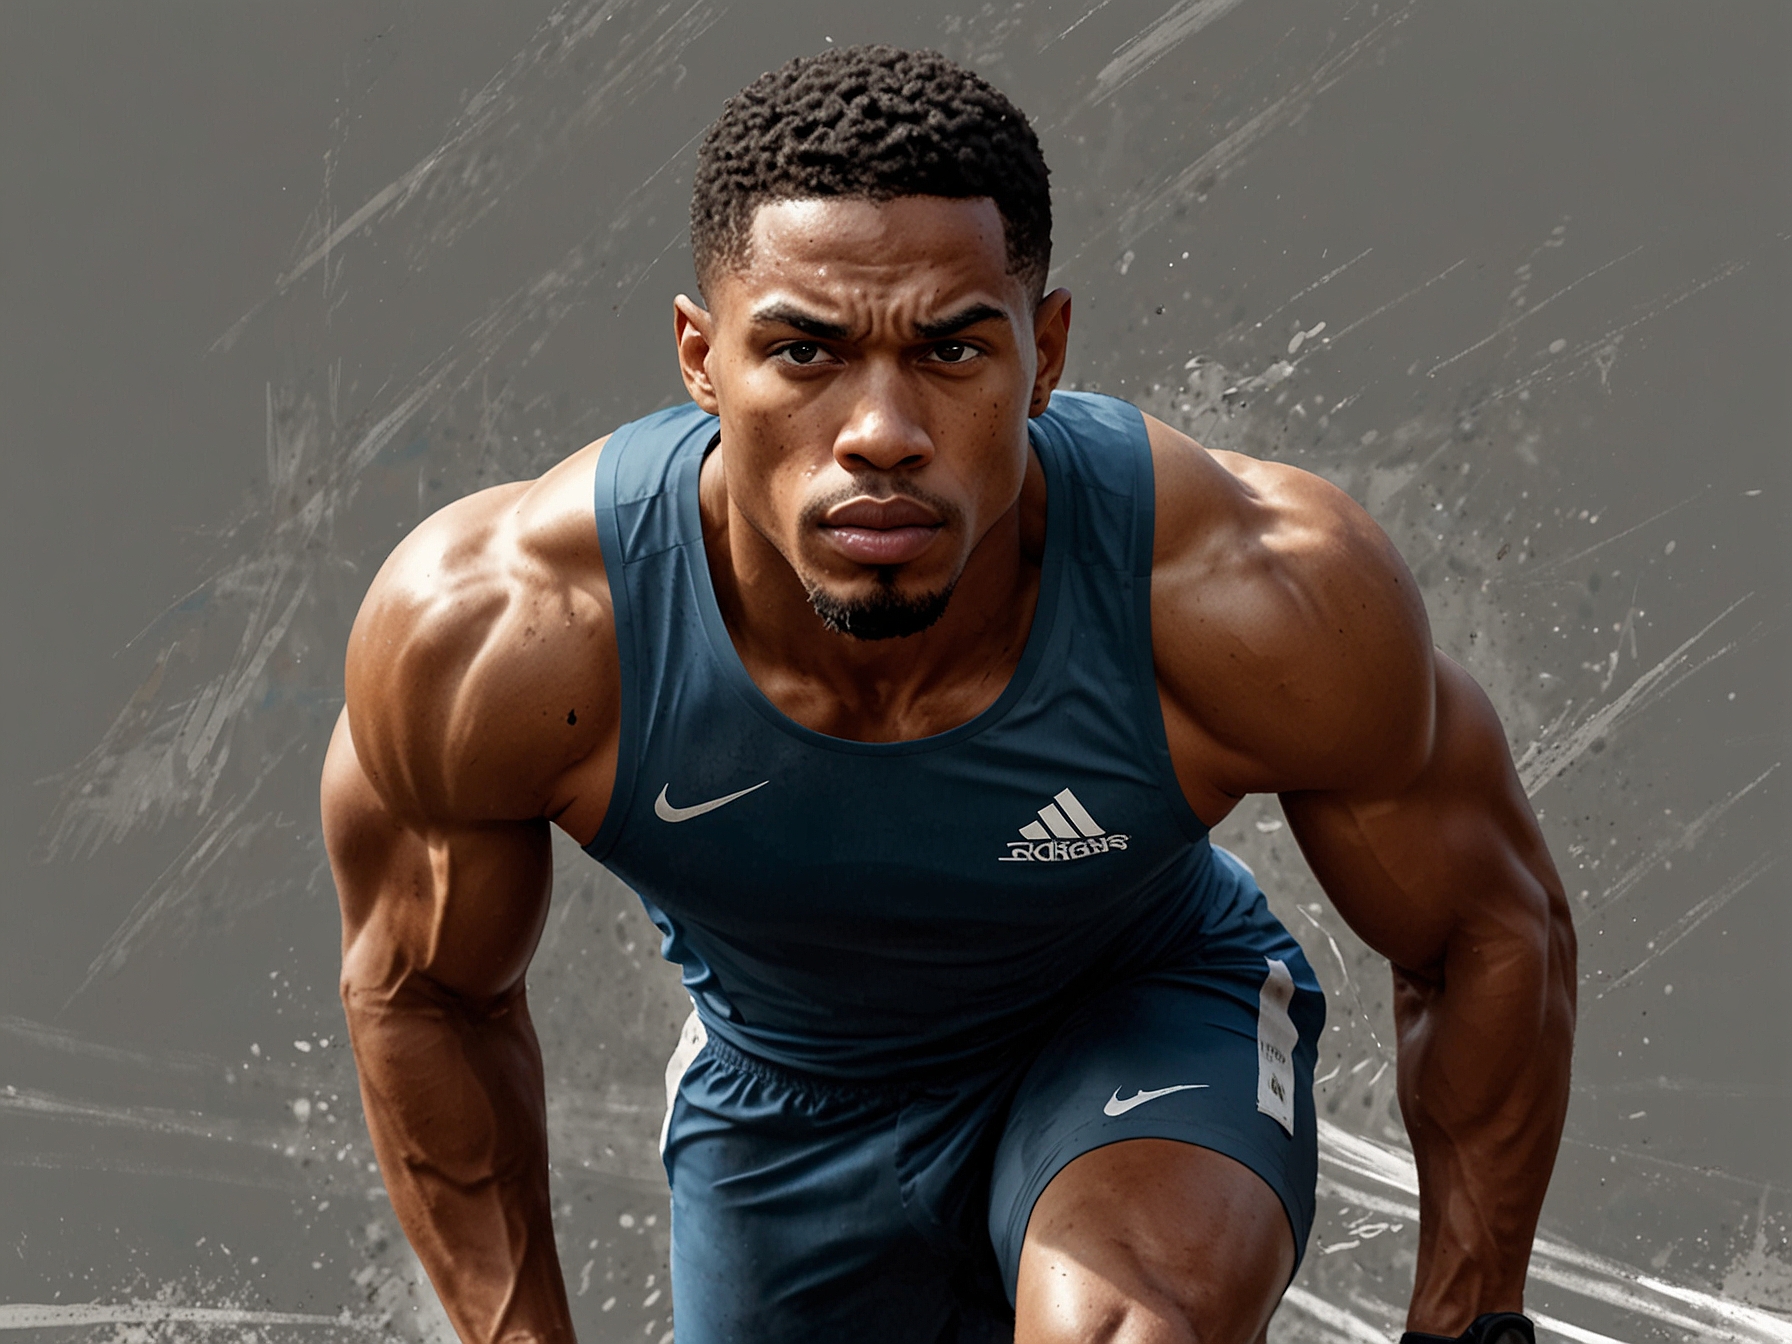 Quincy Wilson trains intensely on the track, showcasing his dedicated regimen of sprint drills and endurance workouts under the supervision of his coach, with an eye on the Paris Olympics.